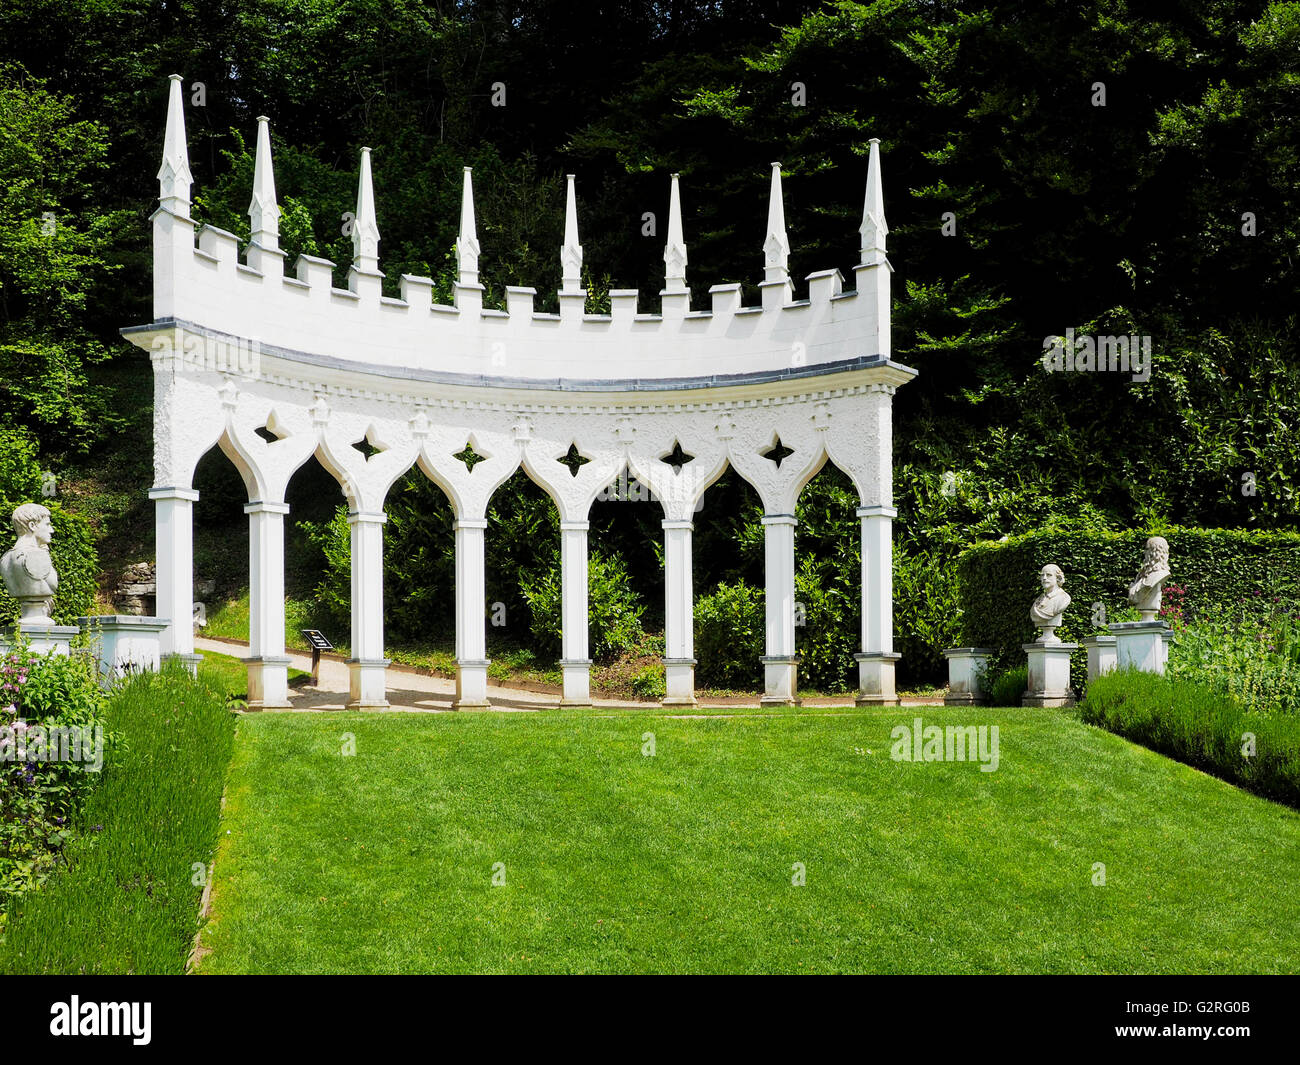 The brilliant white Exedra stands above the Exedra Garden in Painswick Rococo Gardens, Gloucestershire. Stock Photo